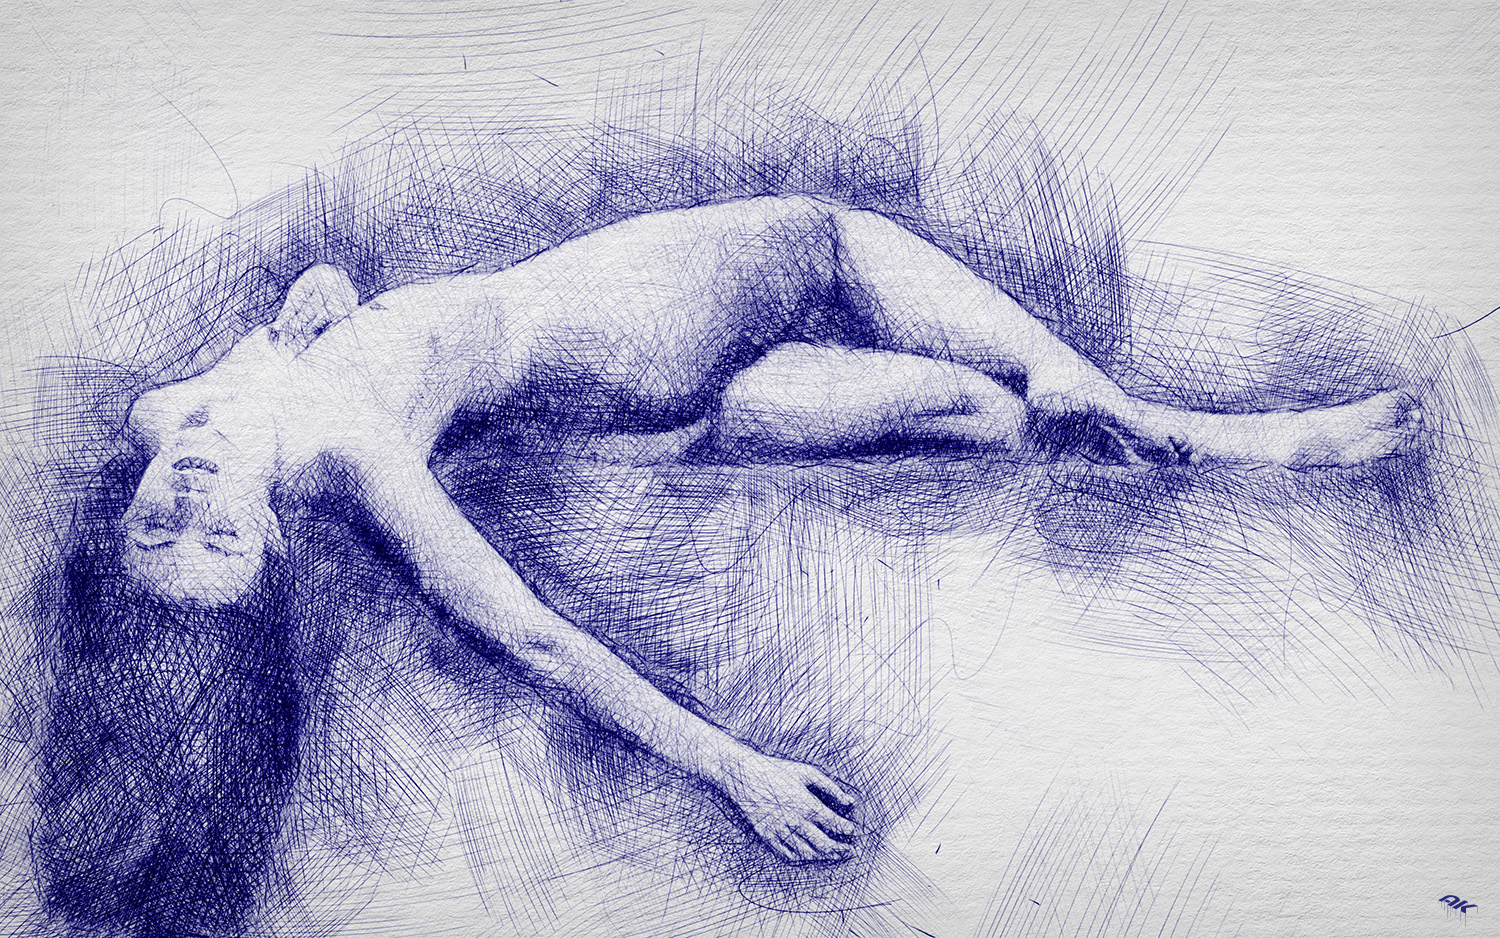 life-drawing-series-5-image-1-copyright-andrew-knutt